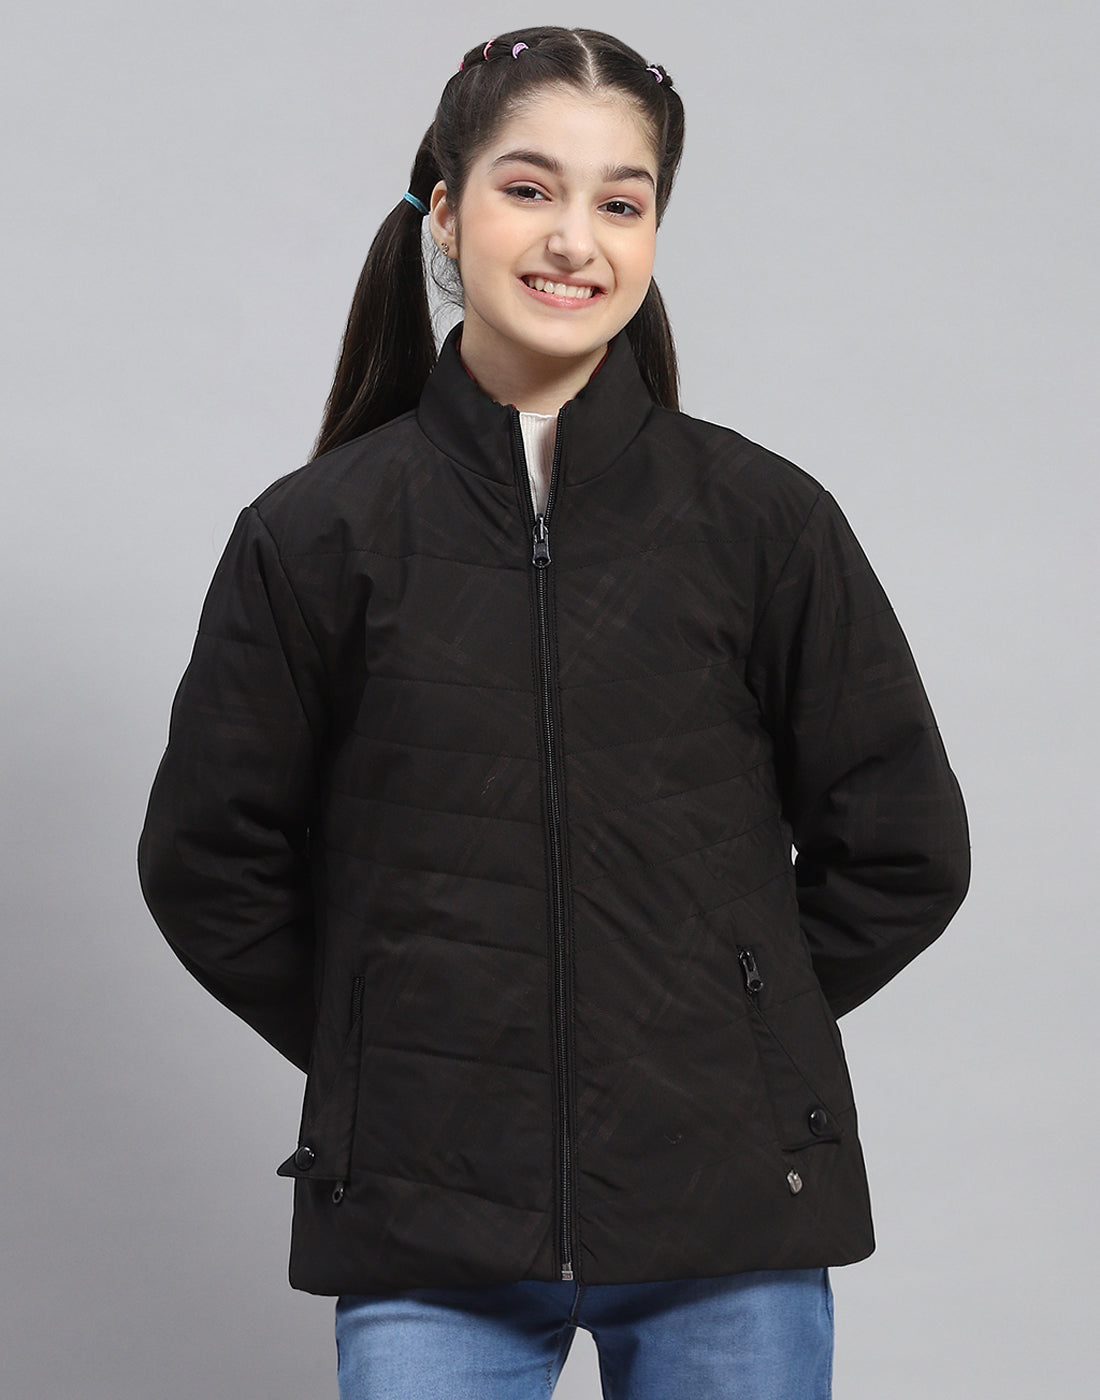 Girls Black Solid Stand Collar Full Sleeve Reversible Jacket